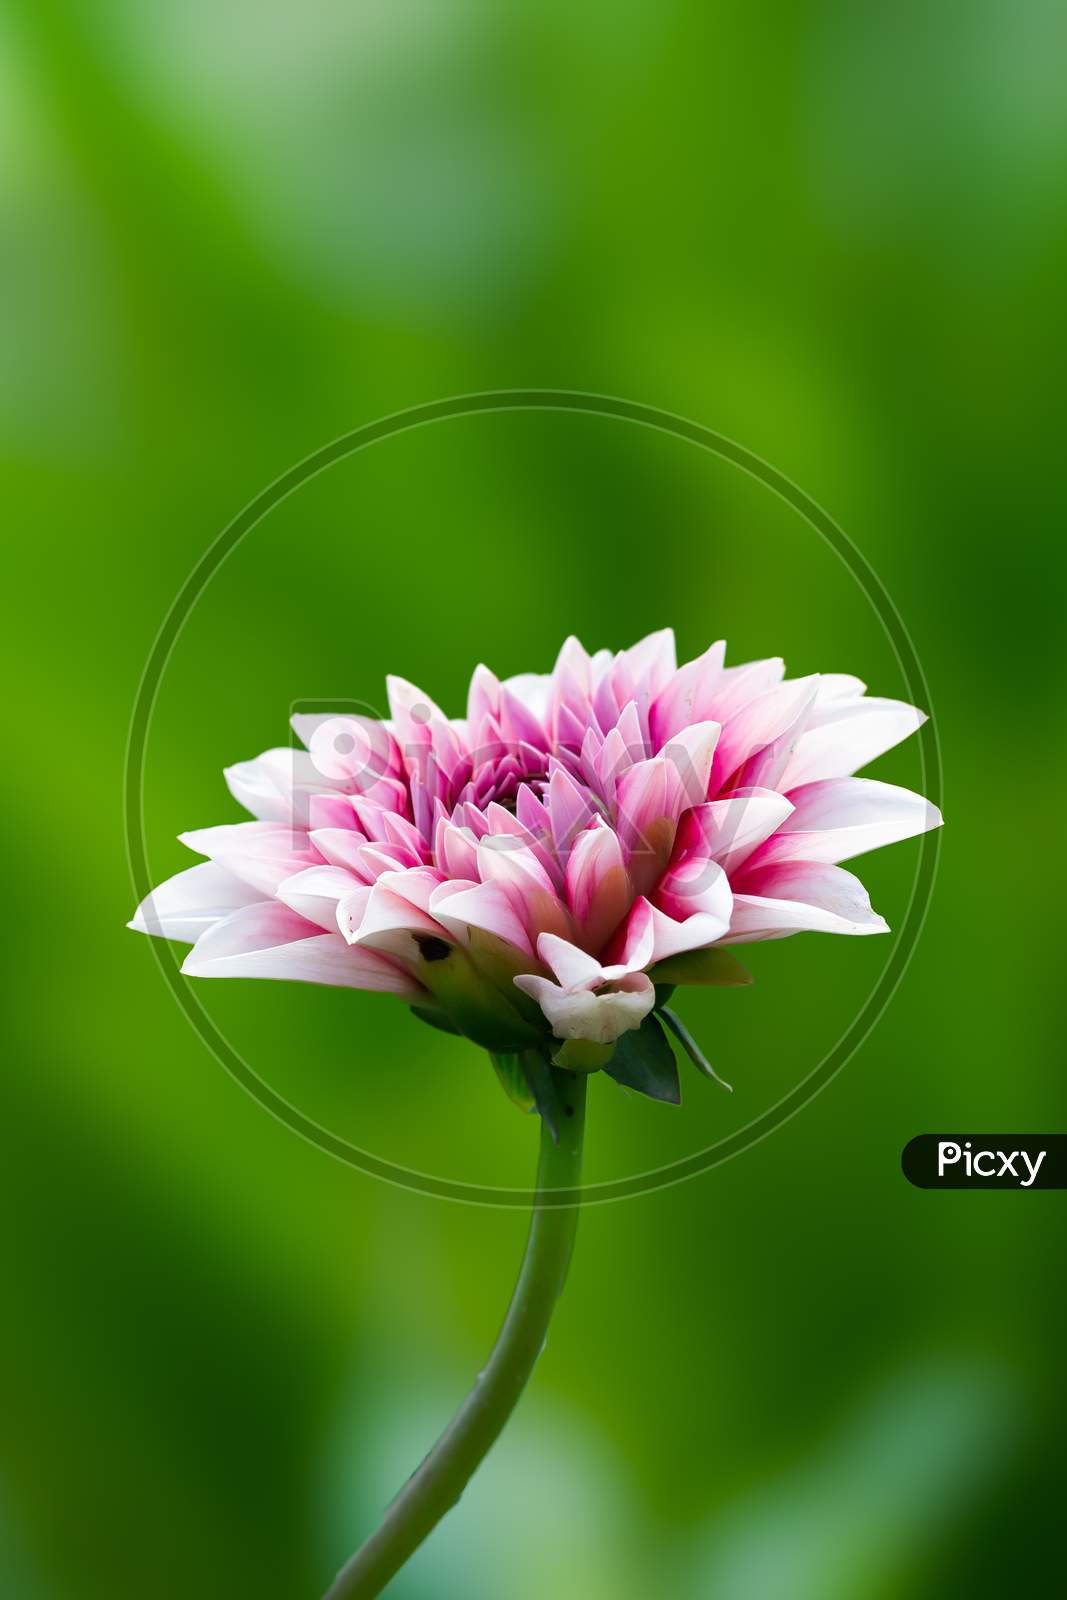 Beautiful Red And White Dalia Flower In The Garden On A Stem Over A Pretty Green Blur Background